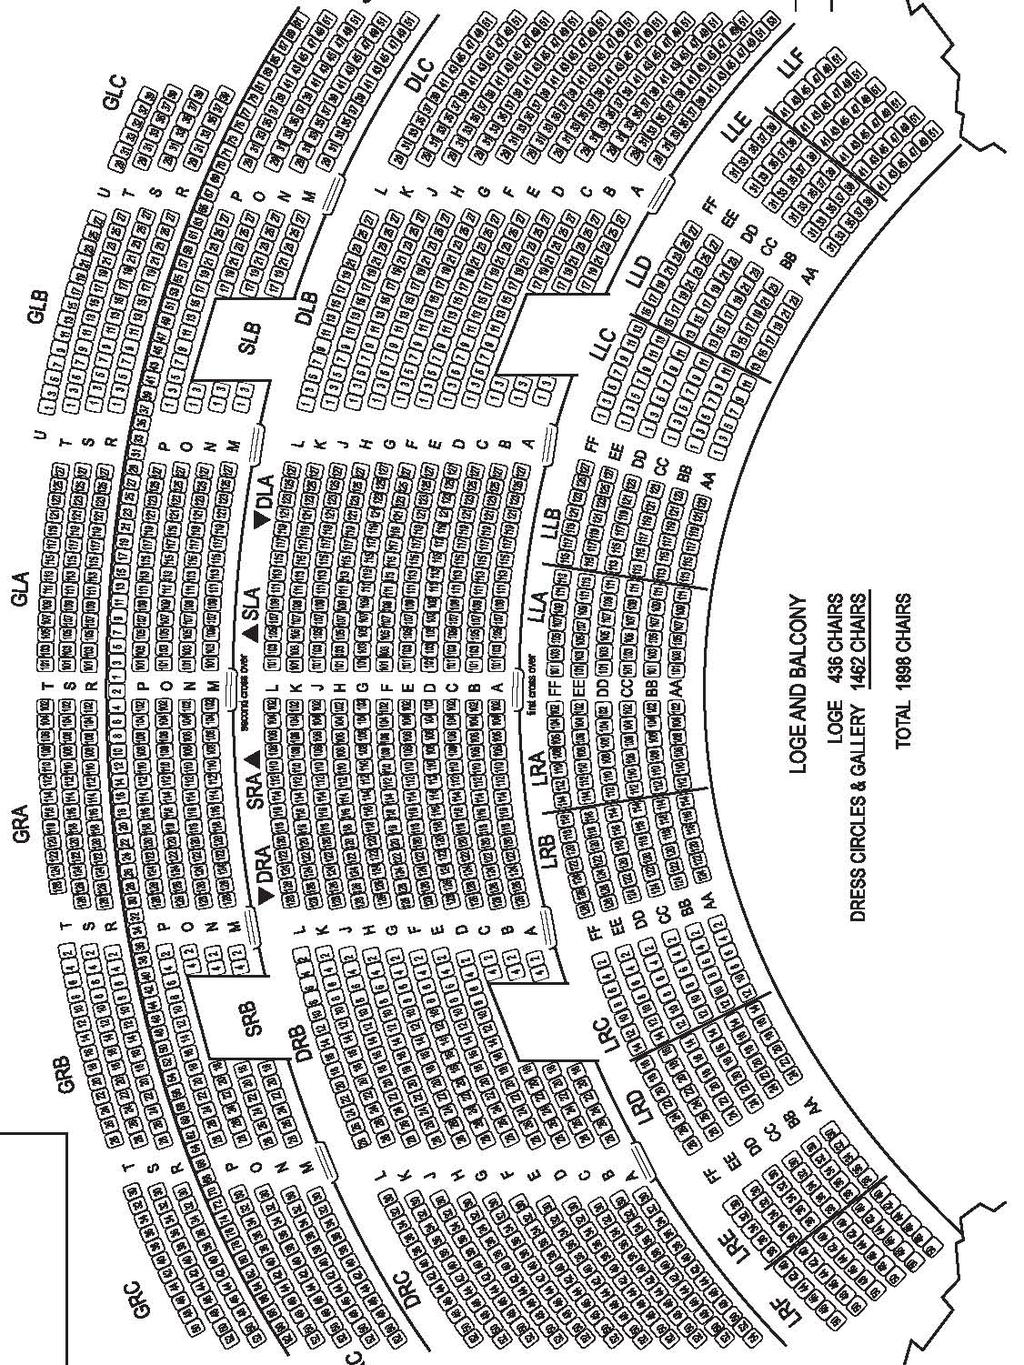 LOGE AND BALCONY LEVEL SEATING CHART PAGE 80 OF 89 660